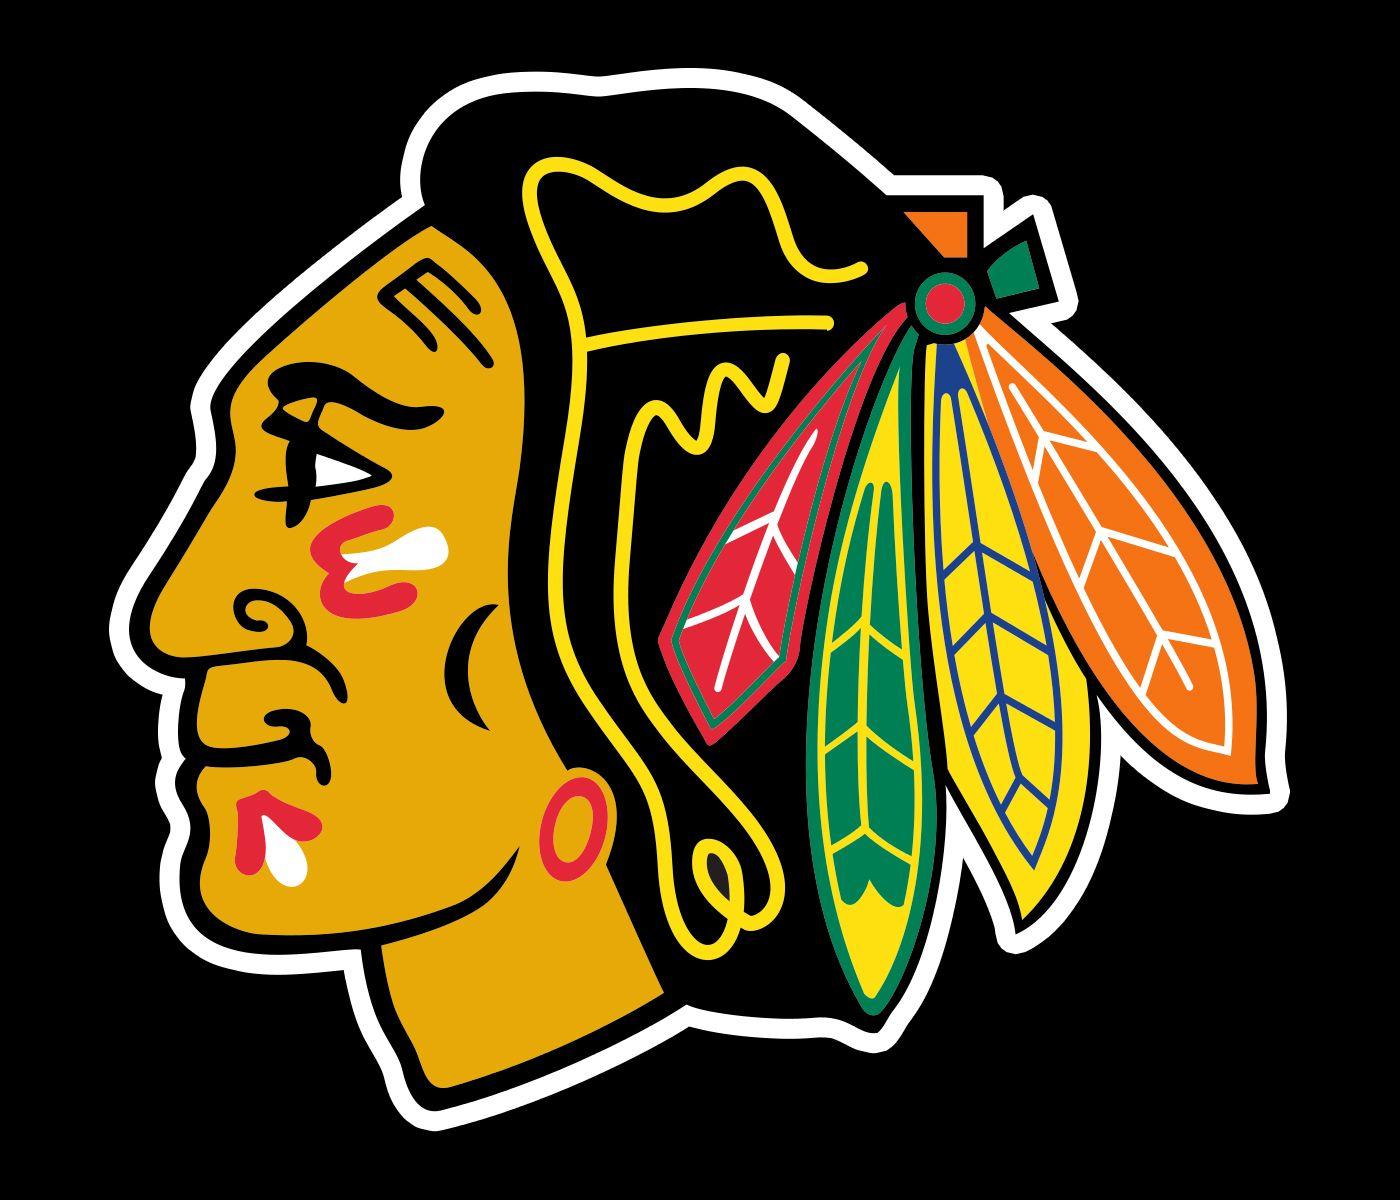 Blackhawk Logo - Blackhawks Logo, Blackhawks Symbol, Meaning, History and Evolution